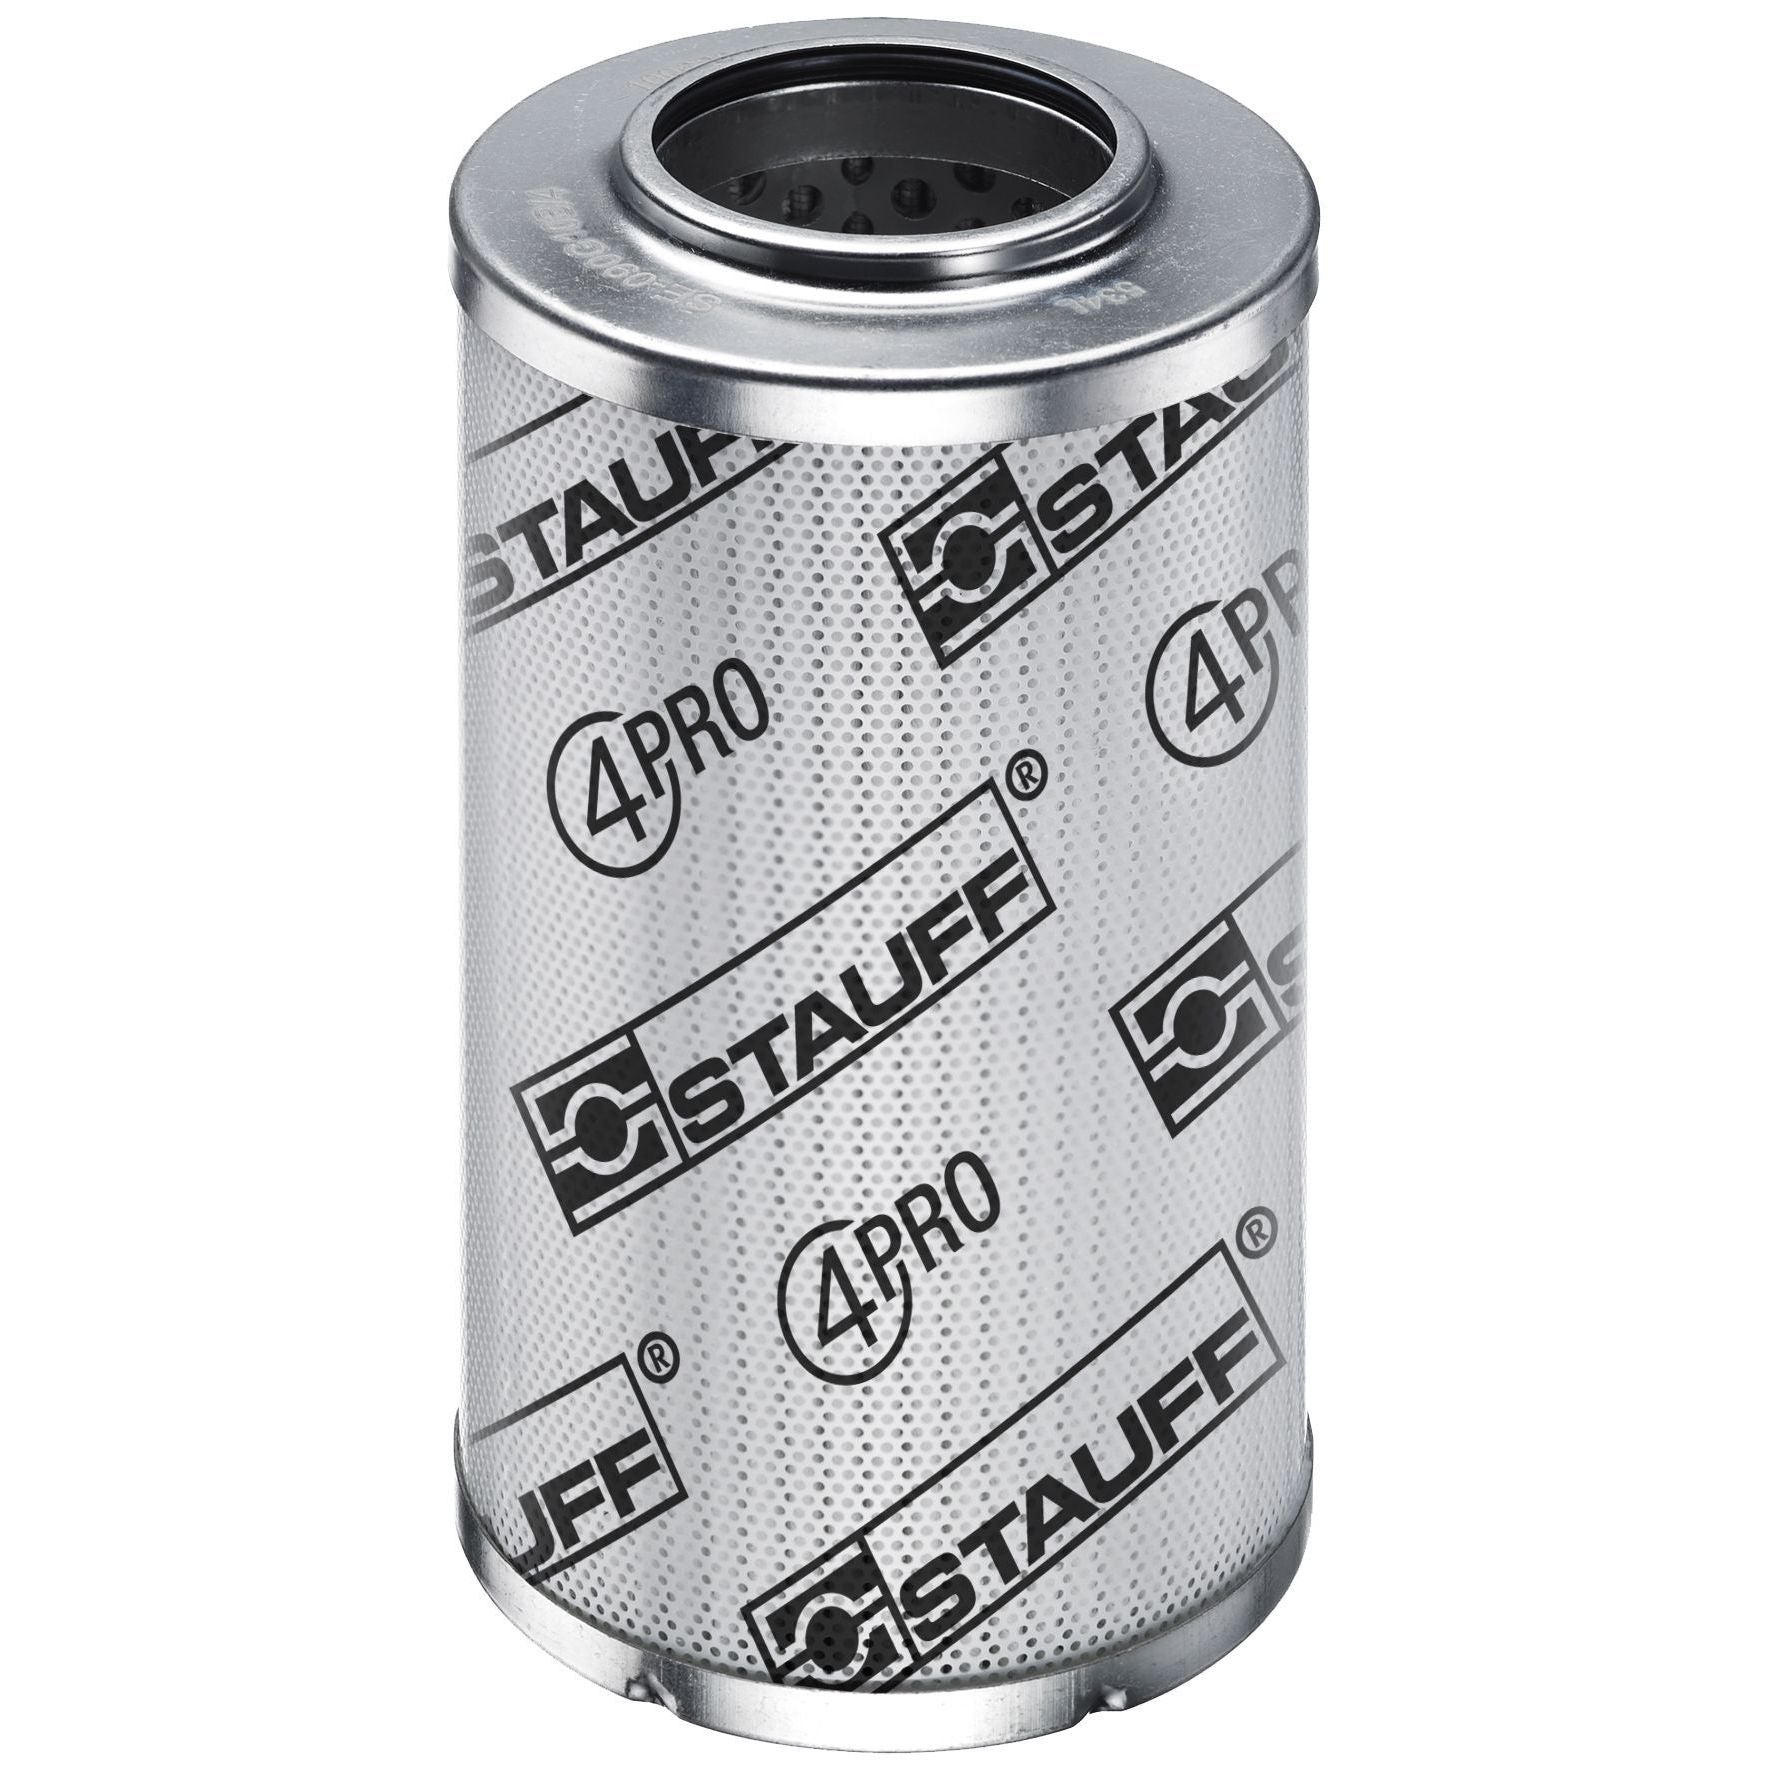 SE-160-G-10-V/4-1 : Stauff SF-160 Series Filter Element, 10 Micron, Synthetic, 363psi Collapse Differential, Viton Seals